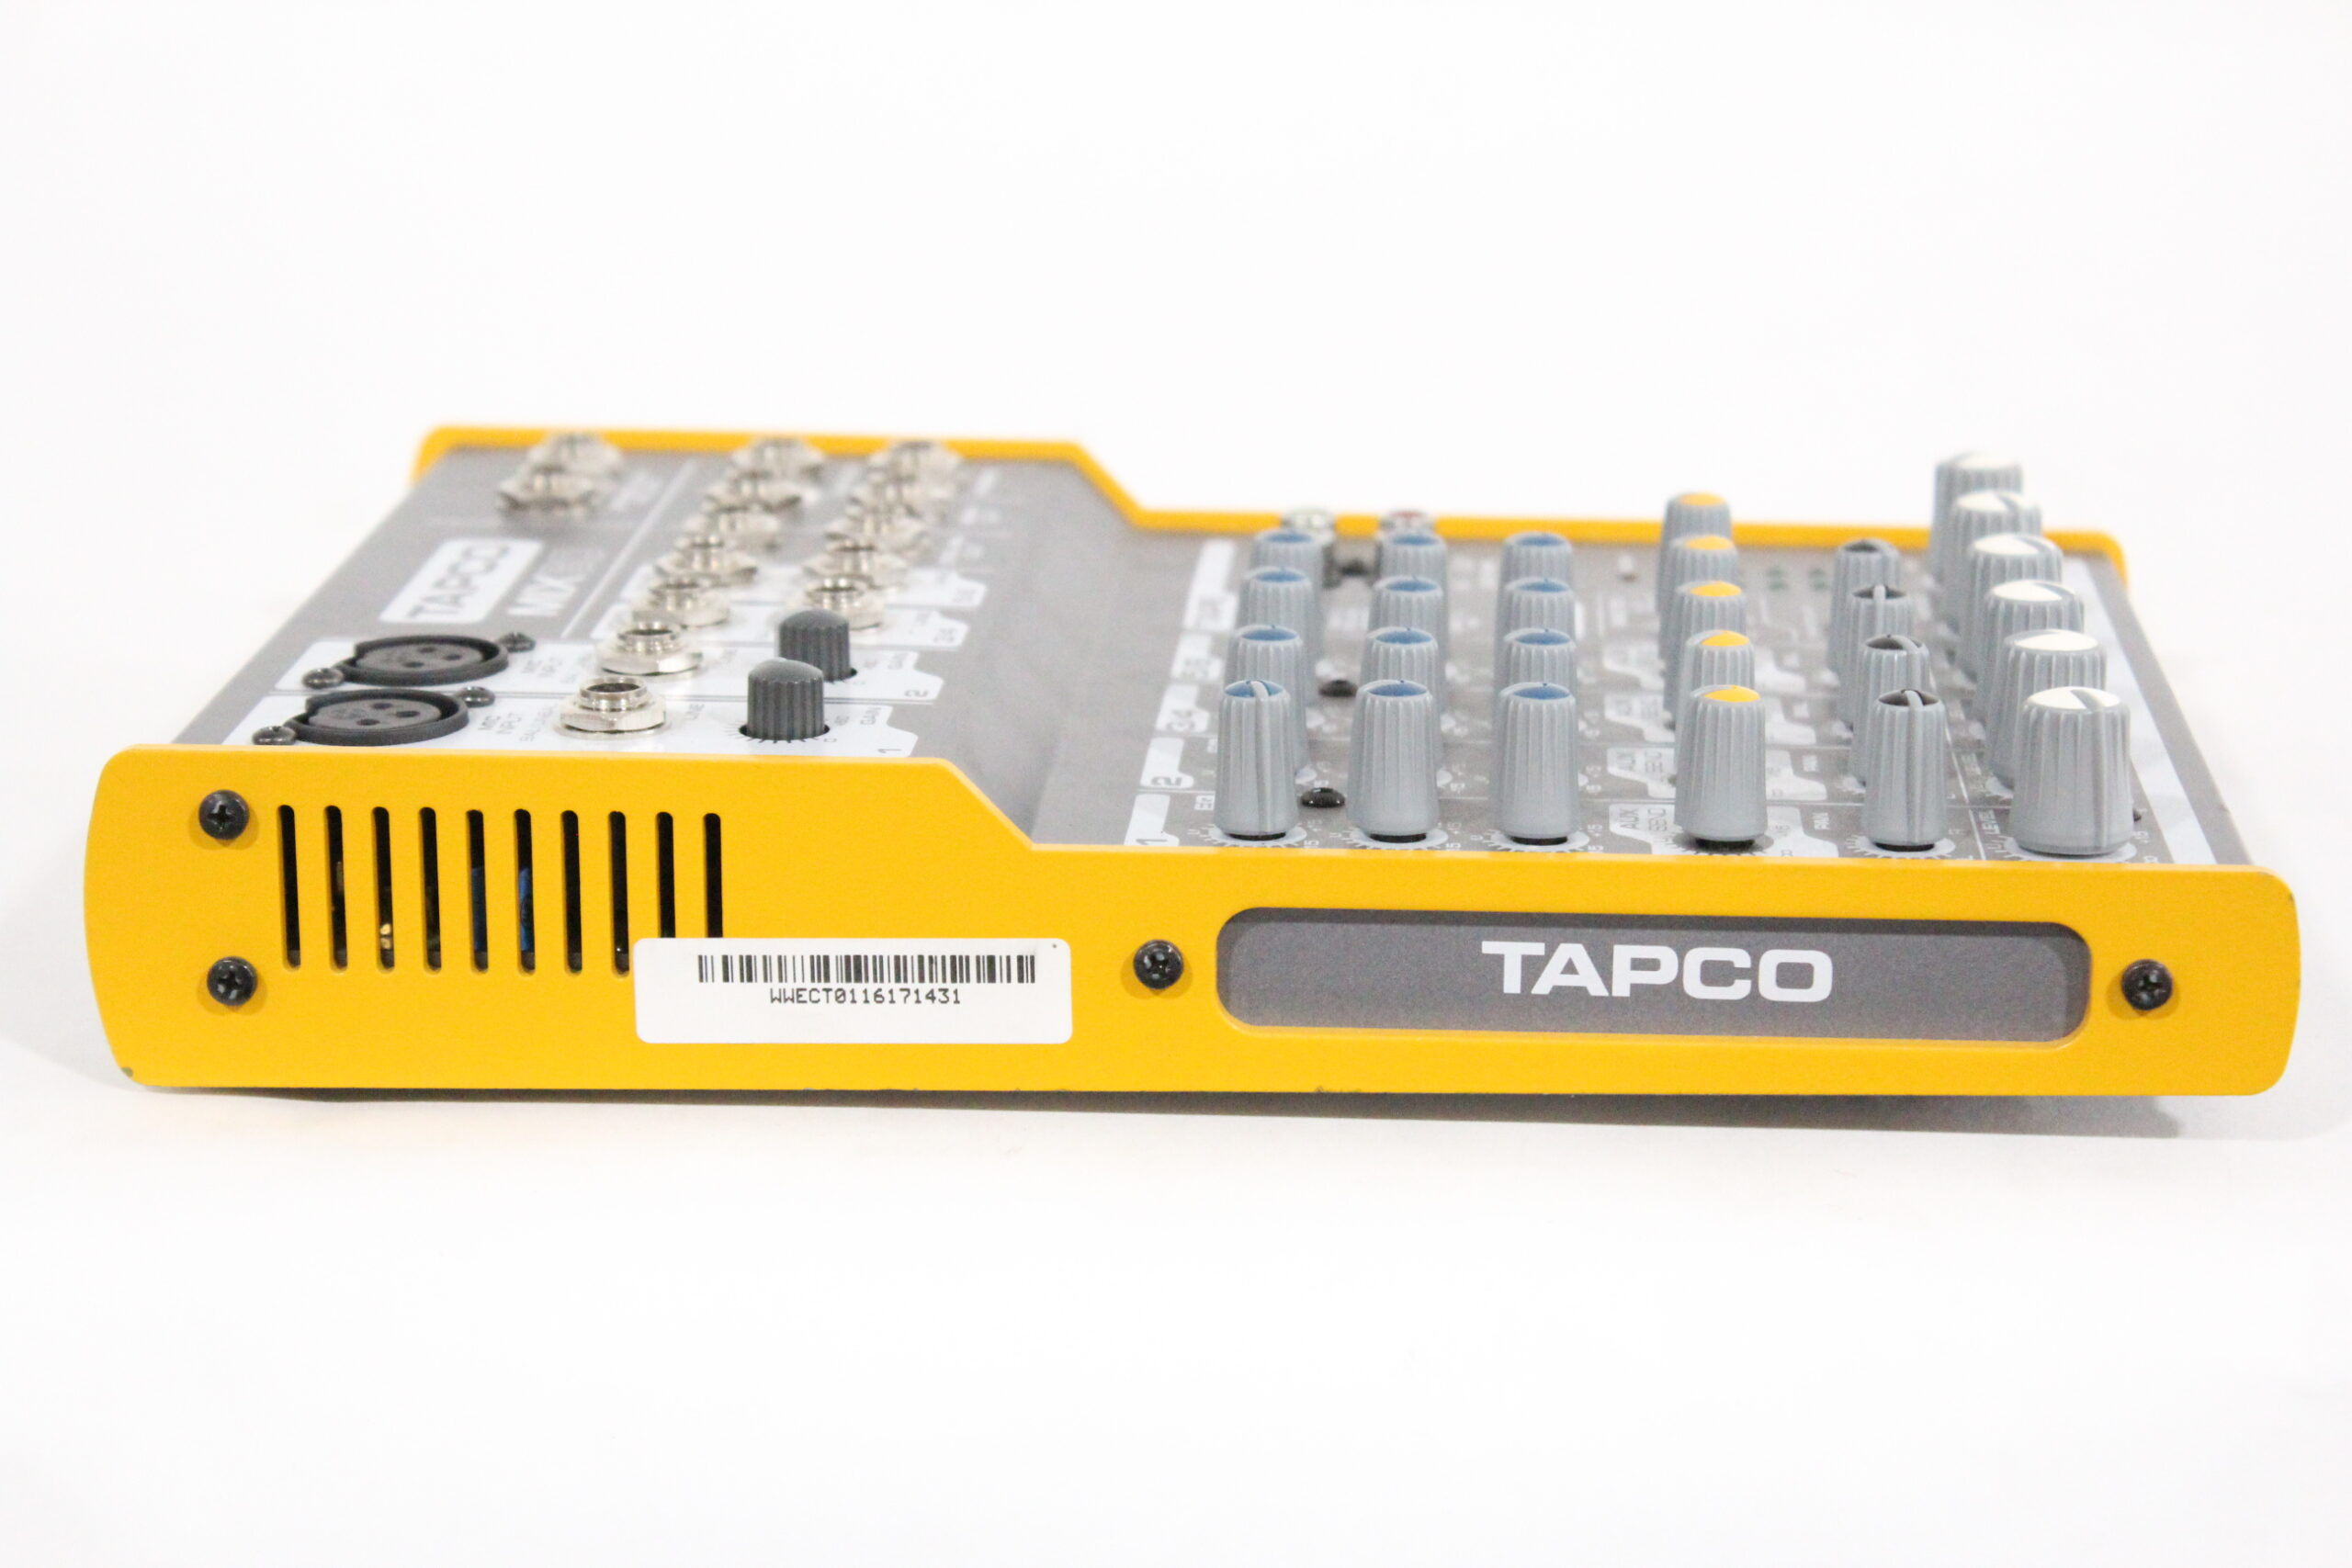 Tapco mix 60 Compact 6-Channel Mixer